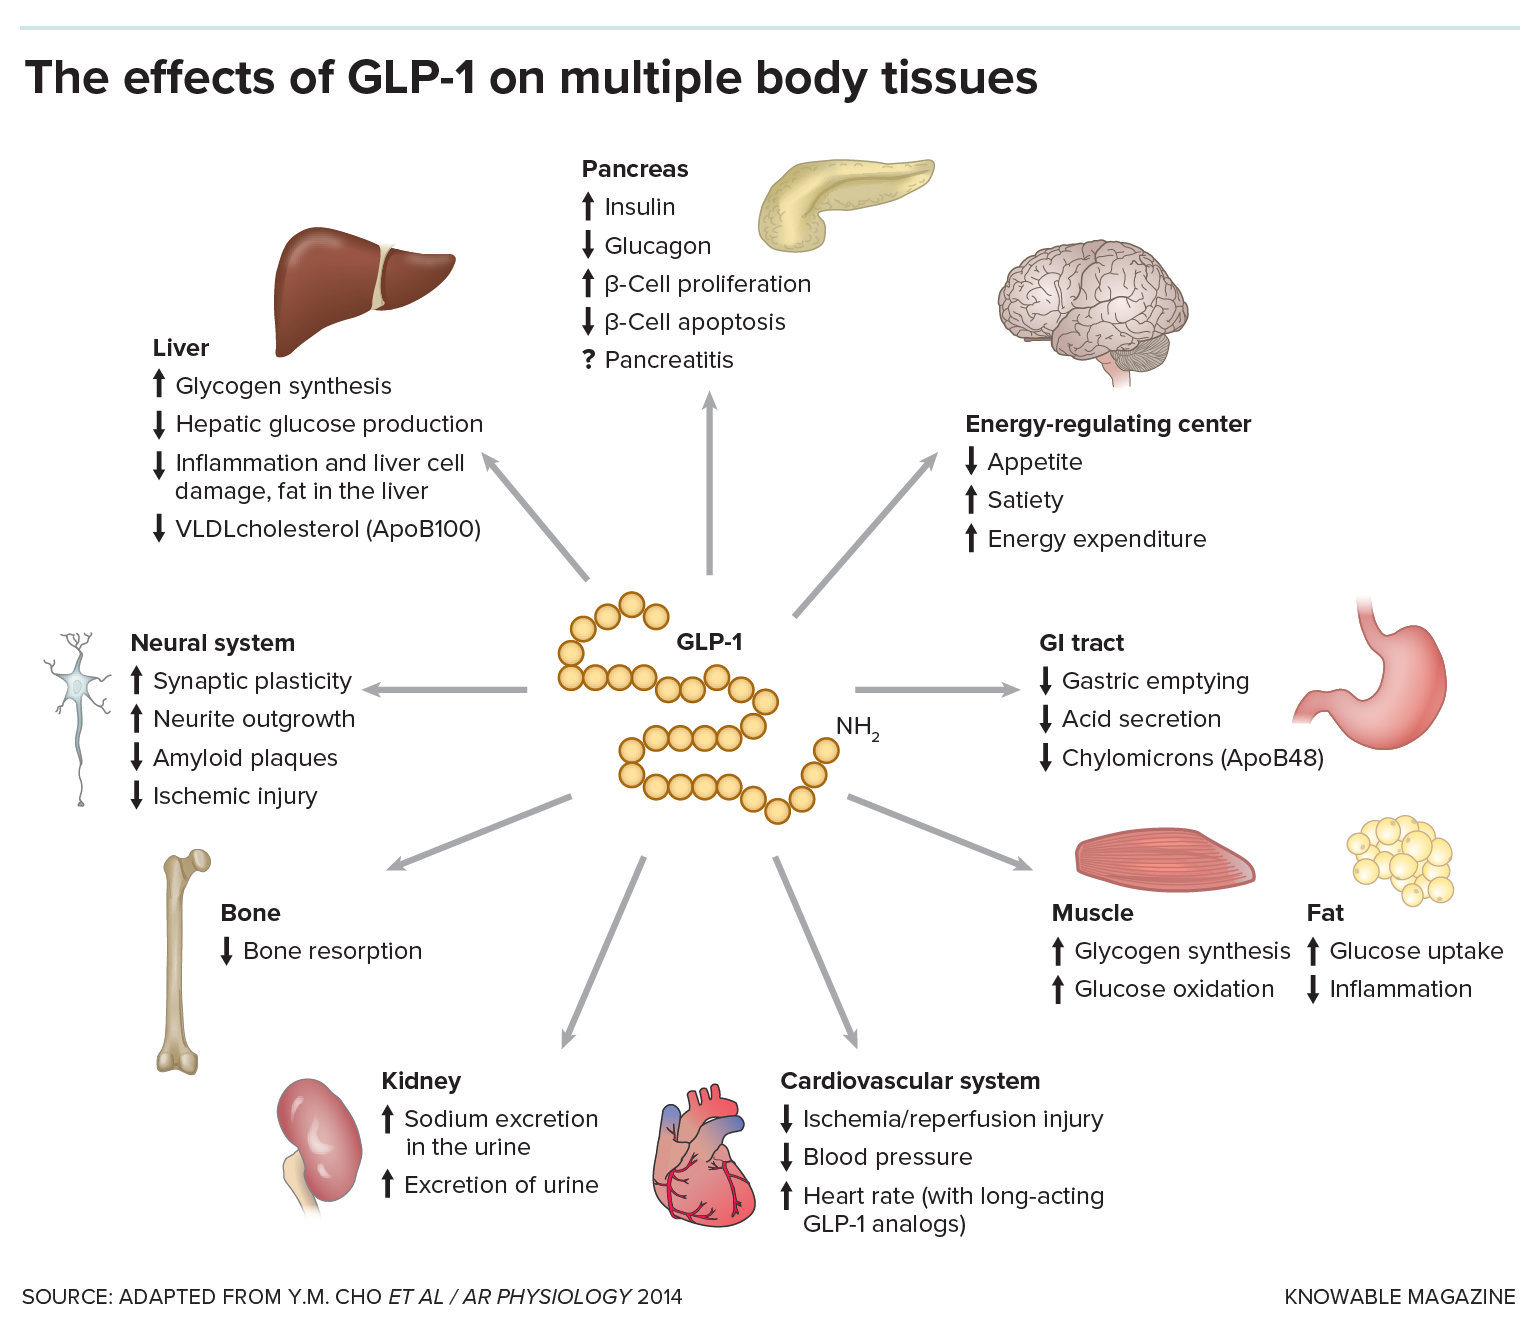 Graphic showing the various functions of GLP-1 in the body, including acting on the pancreas, stomach, gastrointestinal tract, kidneys, bones, heart, liver, muscle and adipose tissues, the energy regulating center of the brain and the neural system.